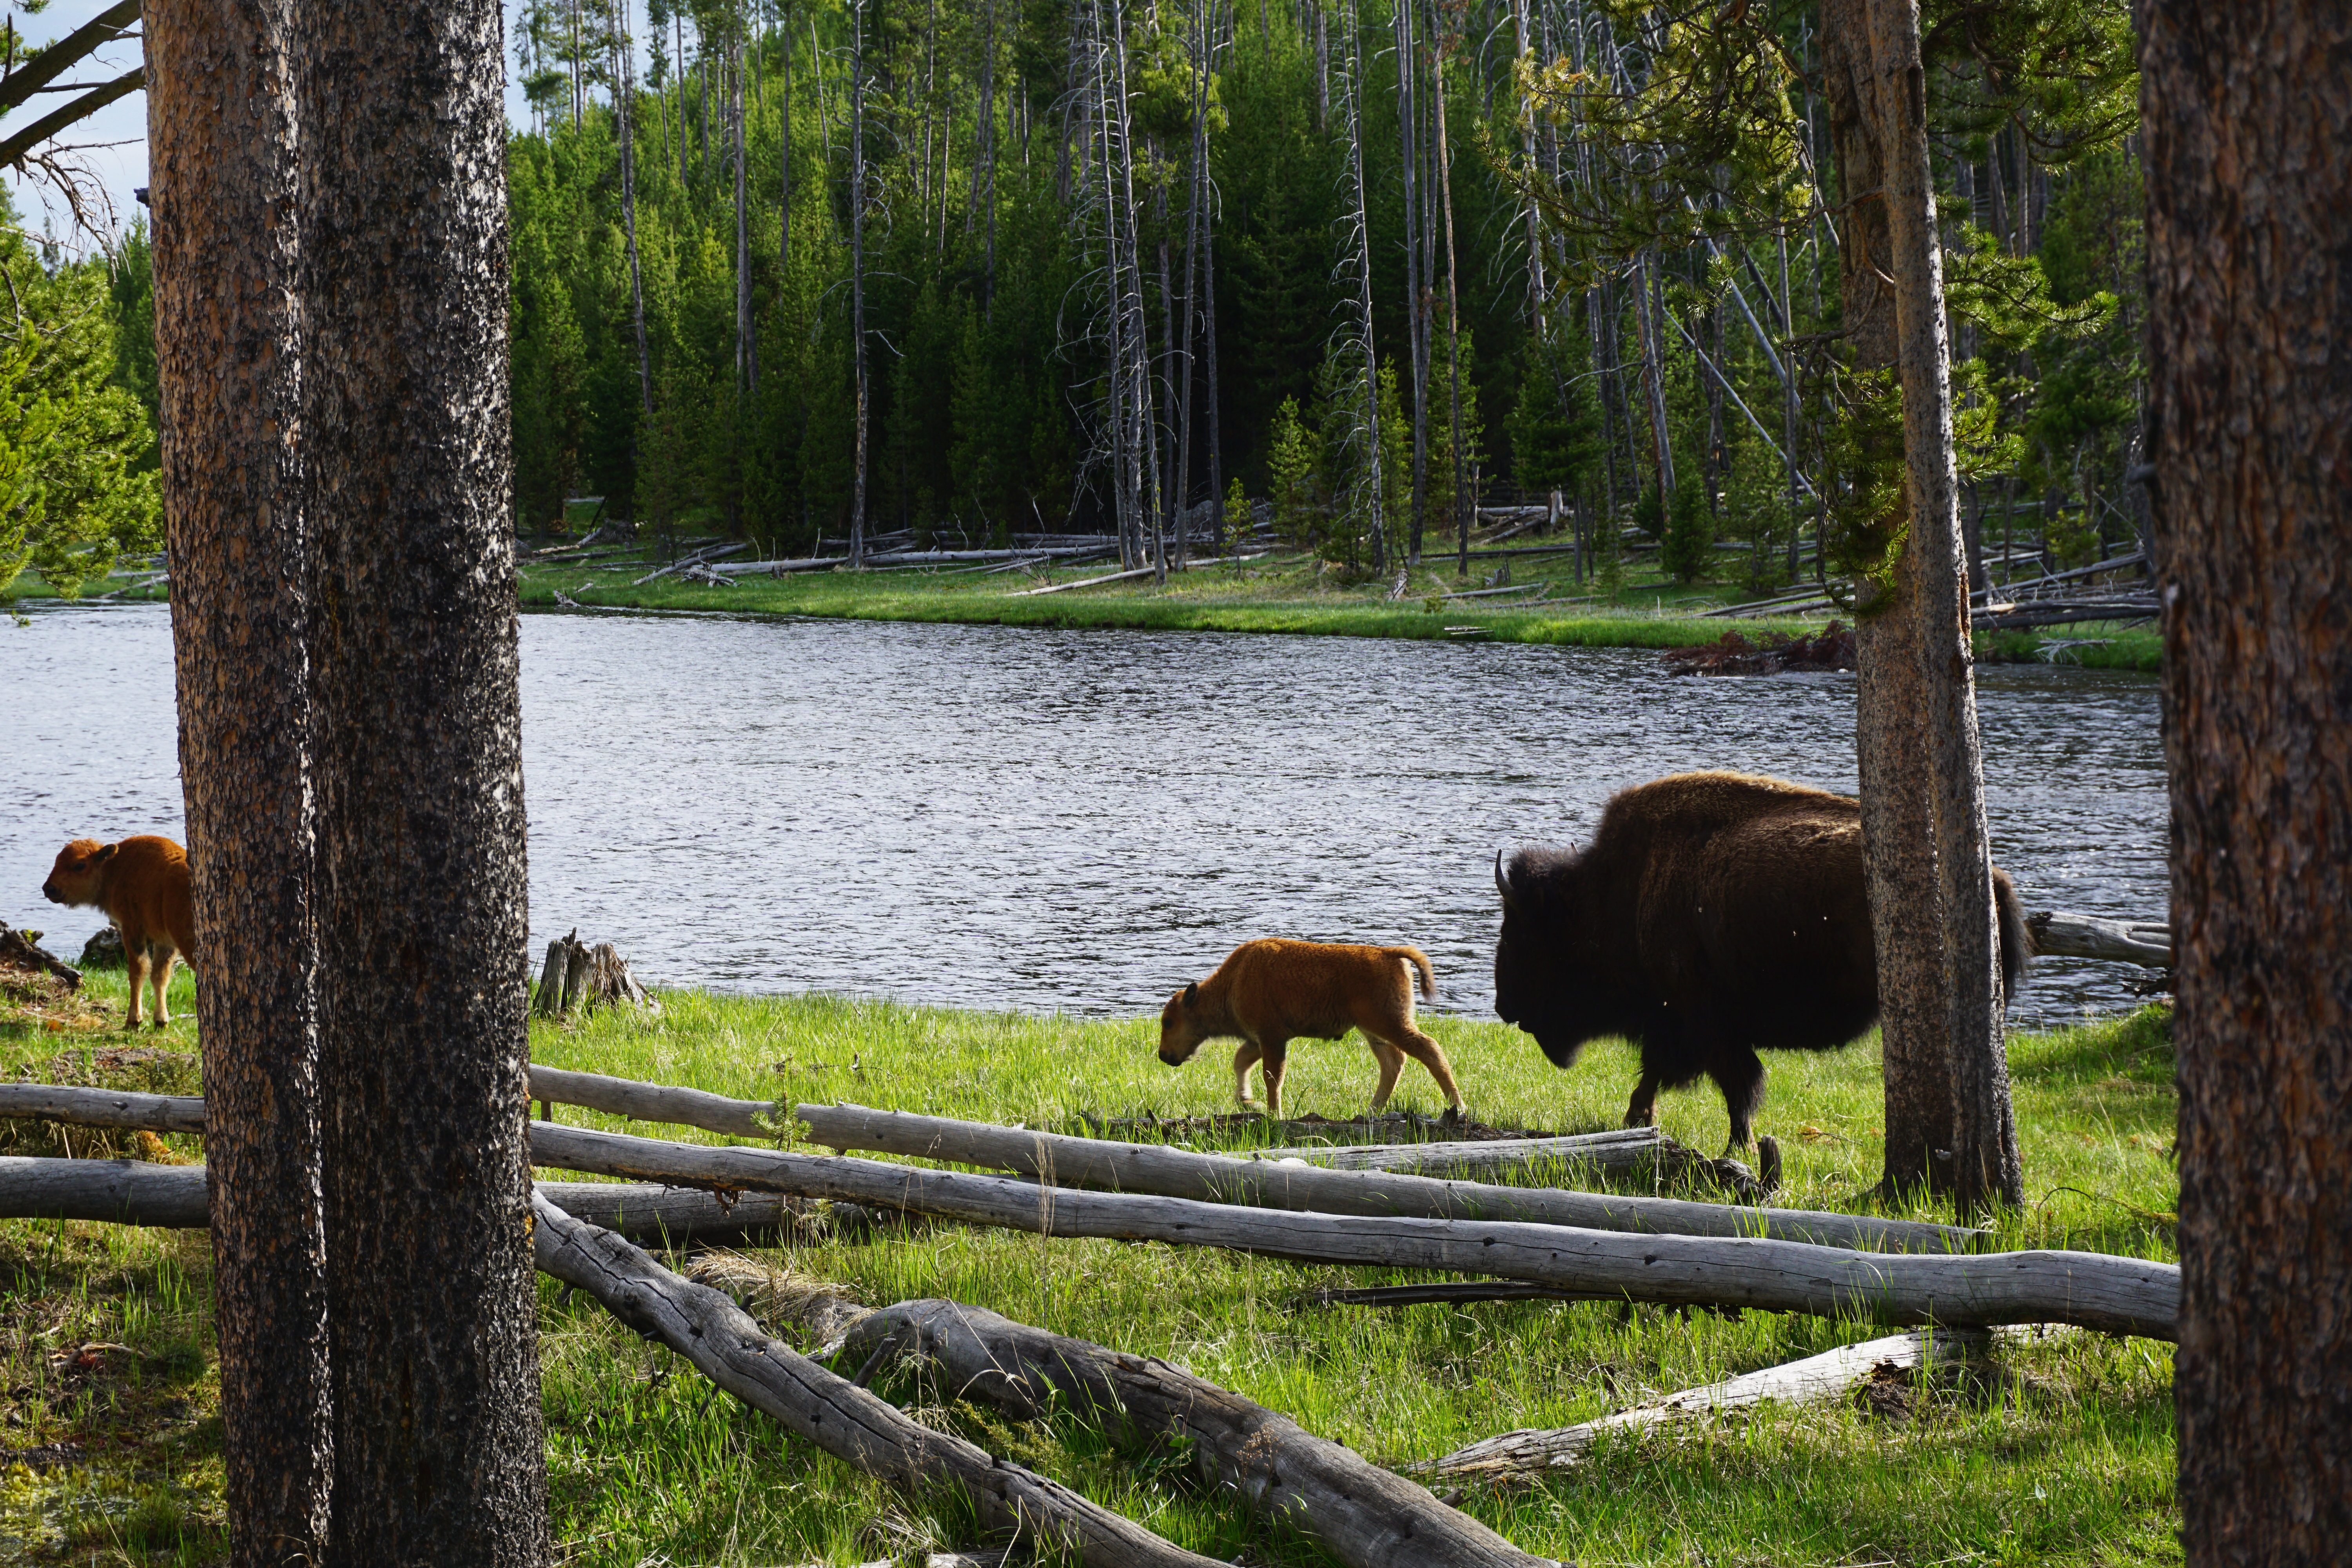 Bison and baby bison in Yellowstone